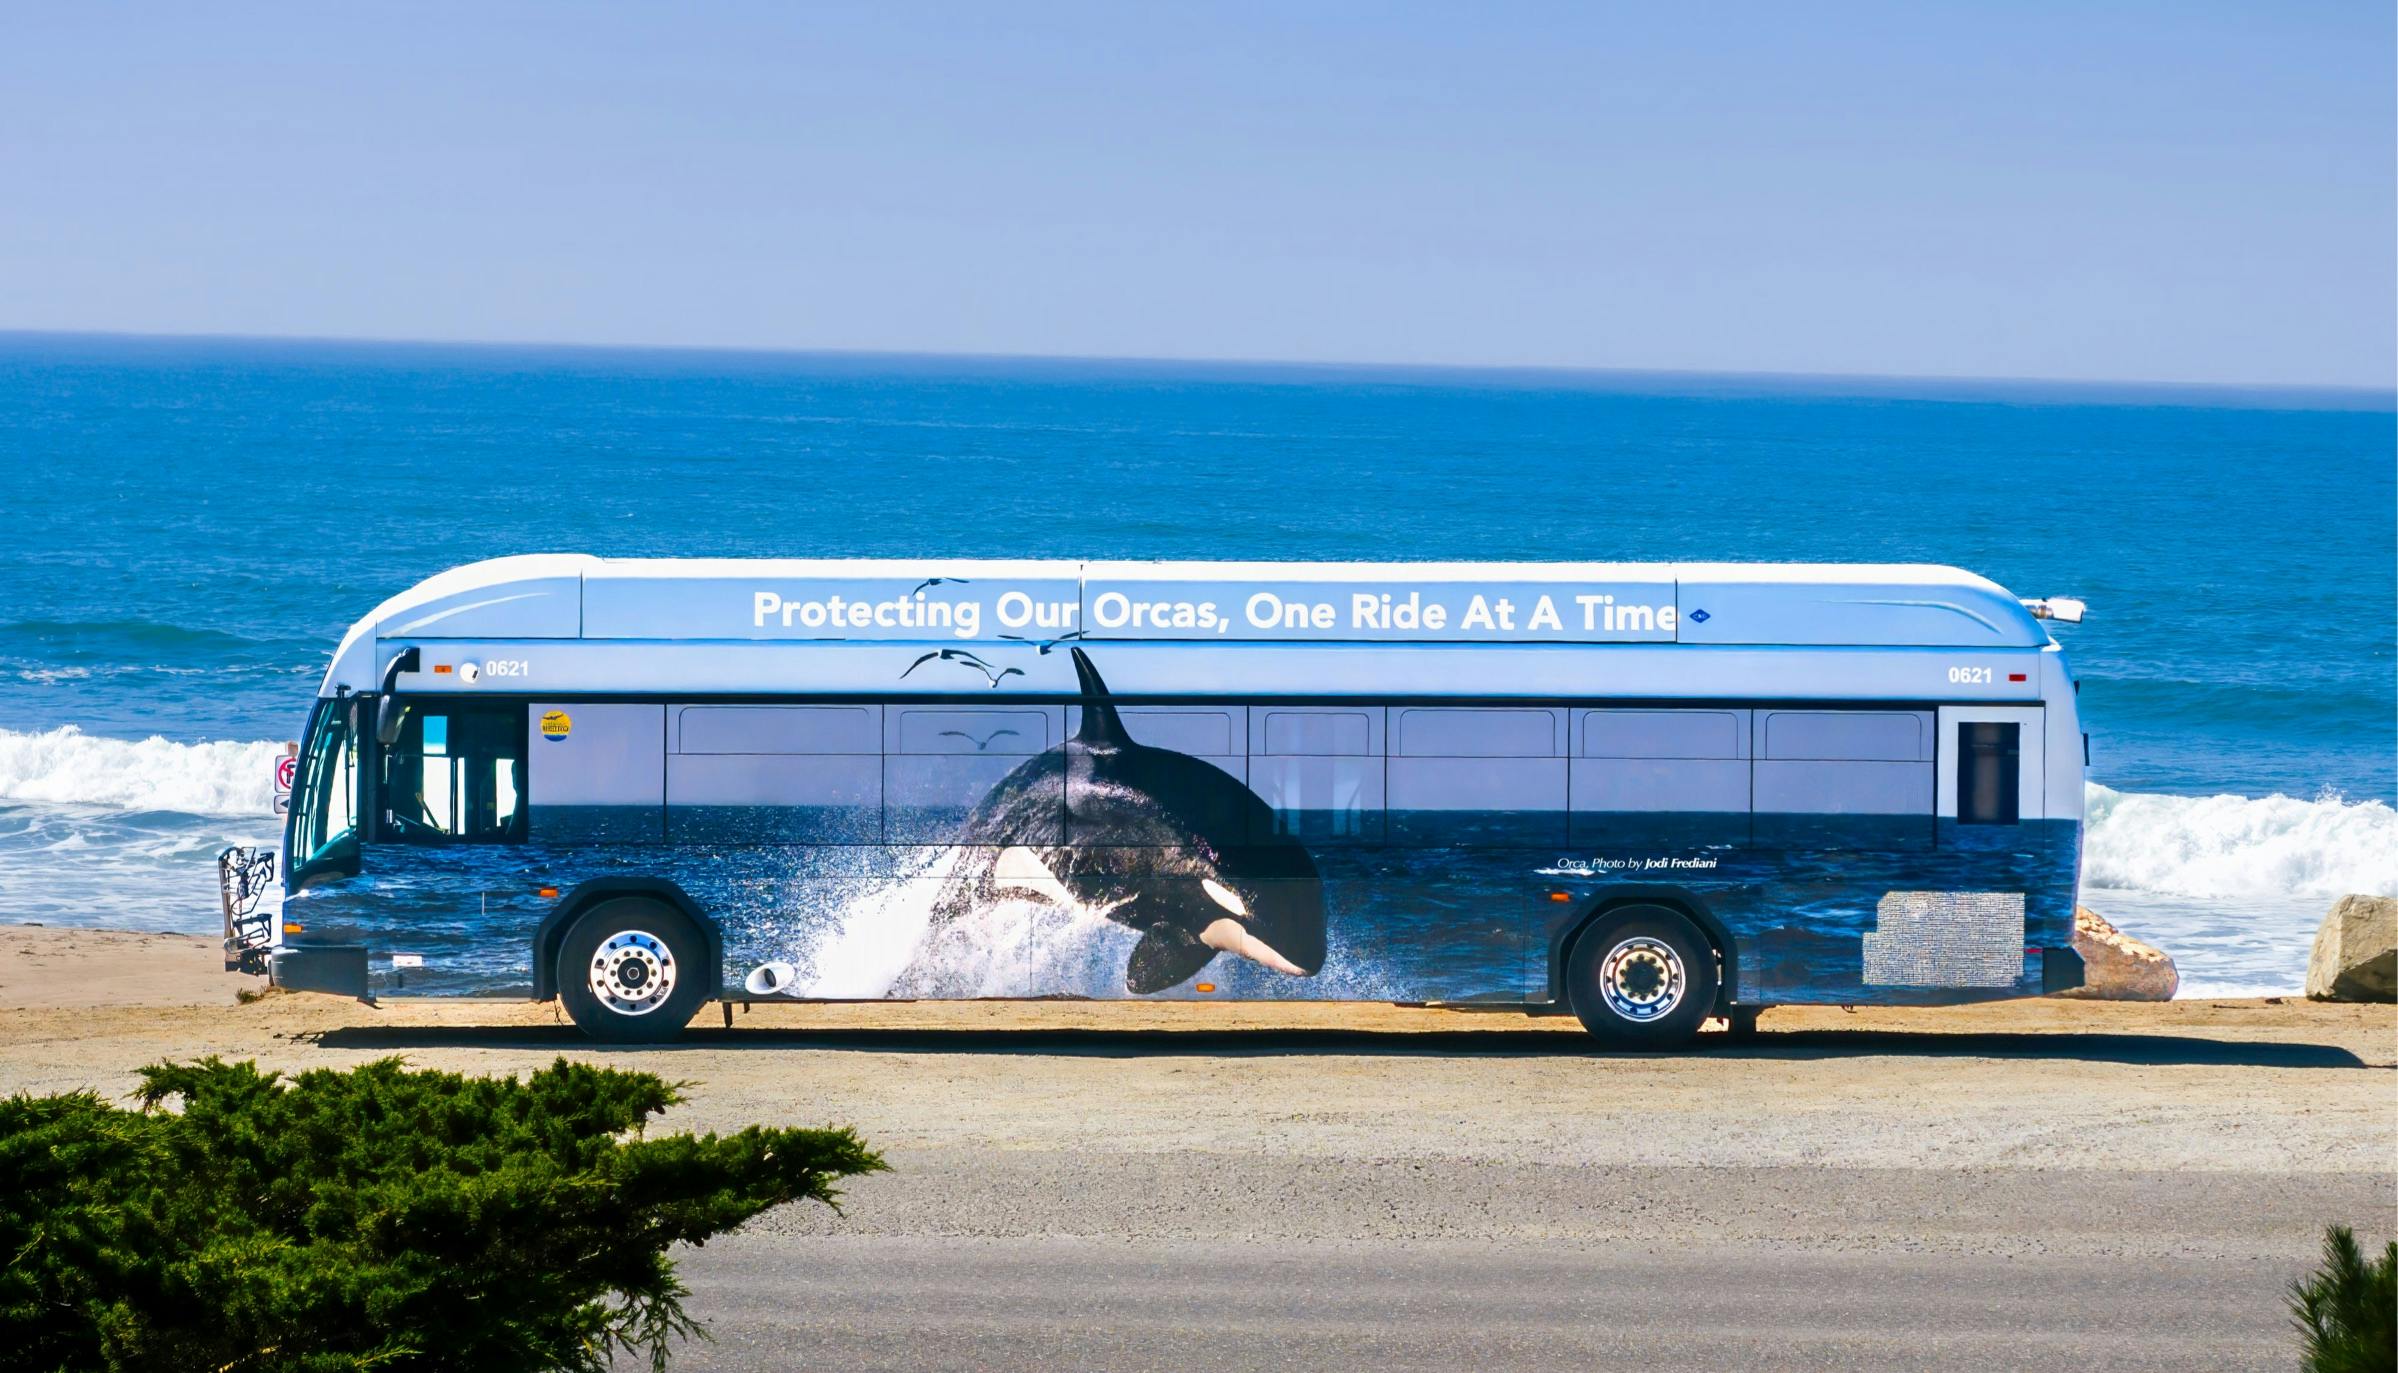 An image of an orca on a Santa Cruz Metro bus photographed by Jody Frediani